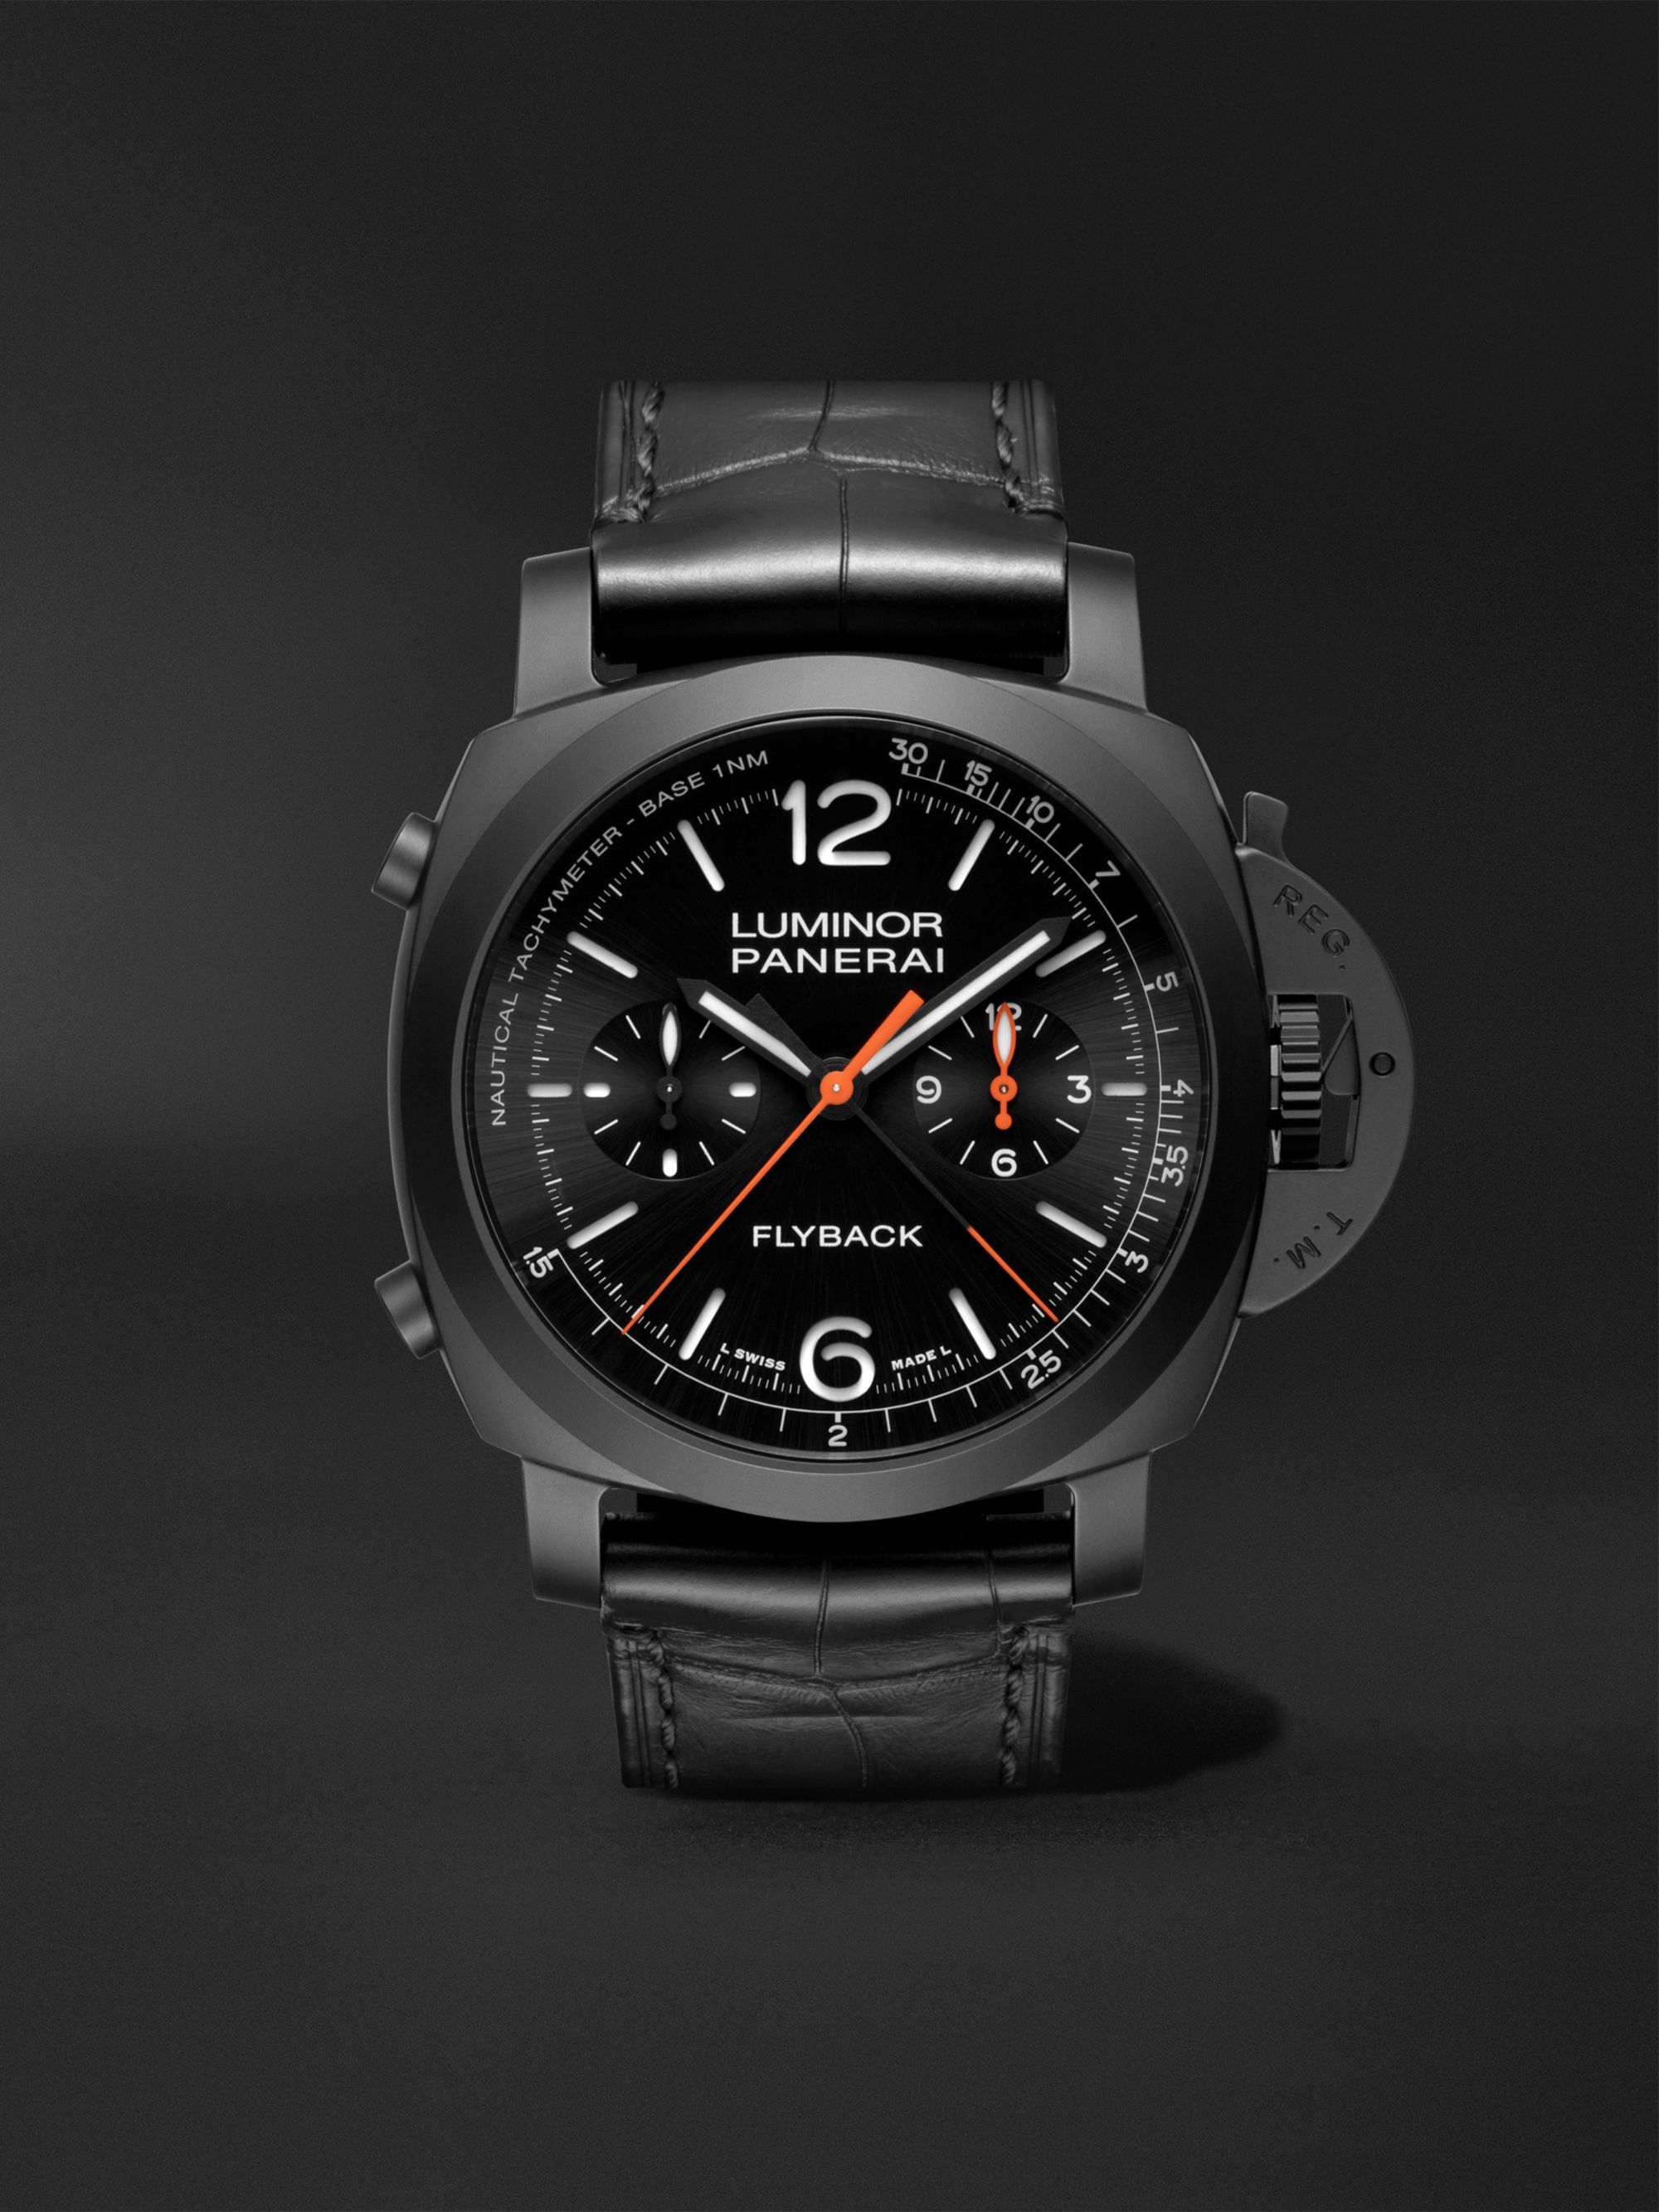 PANERAI Luminor Chrono Limited Edition Automatic Flyback Chronograph 44mm Ceramic and Alligator Watch, Ref. No. PAM01298